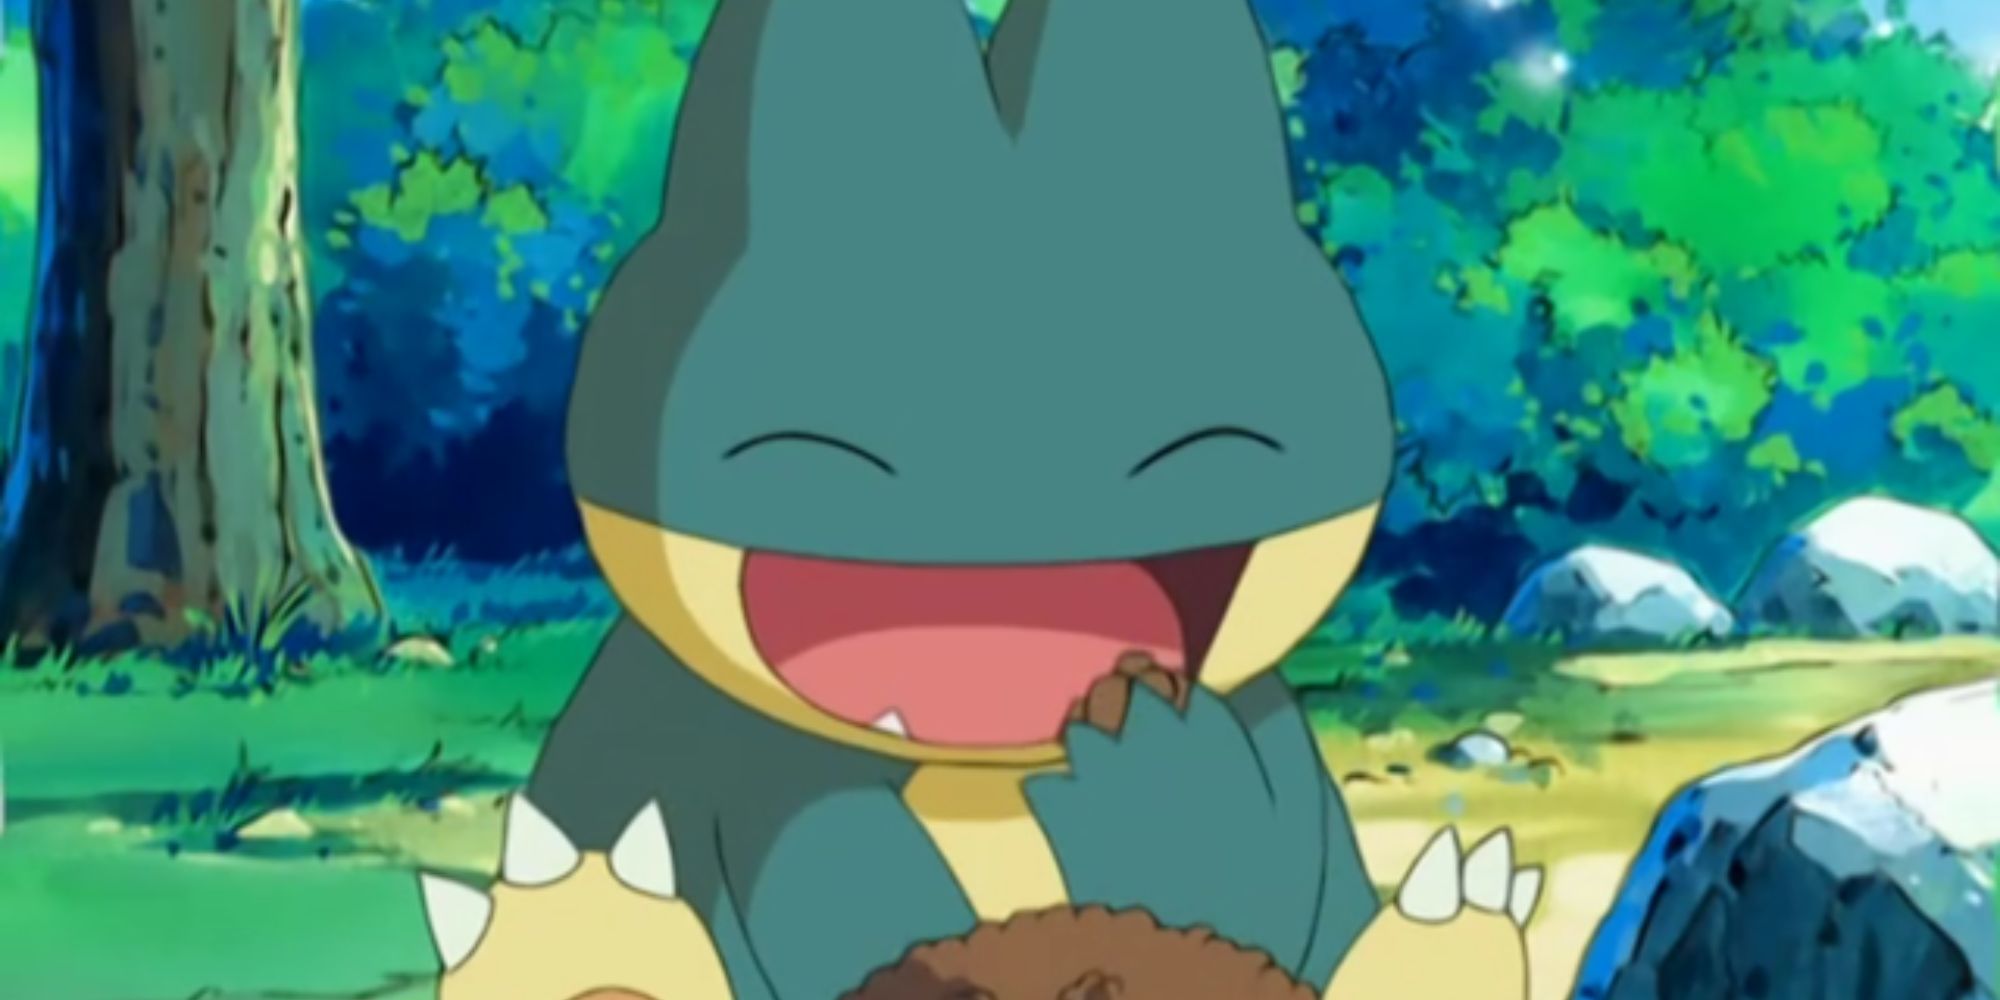 May's Munchlax eating a bowl of Pokemon food.